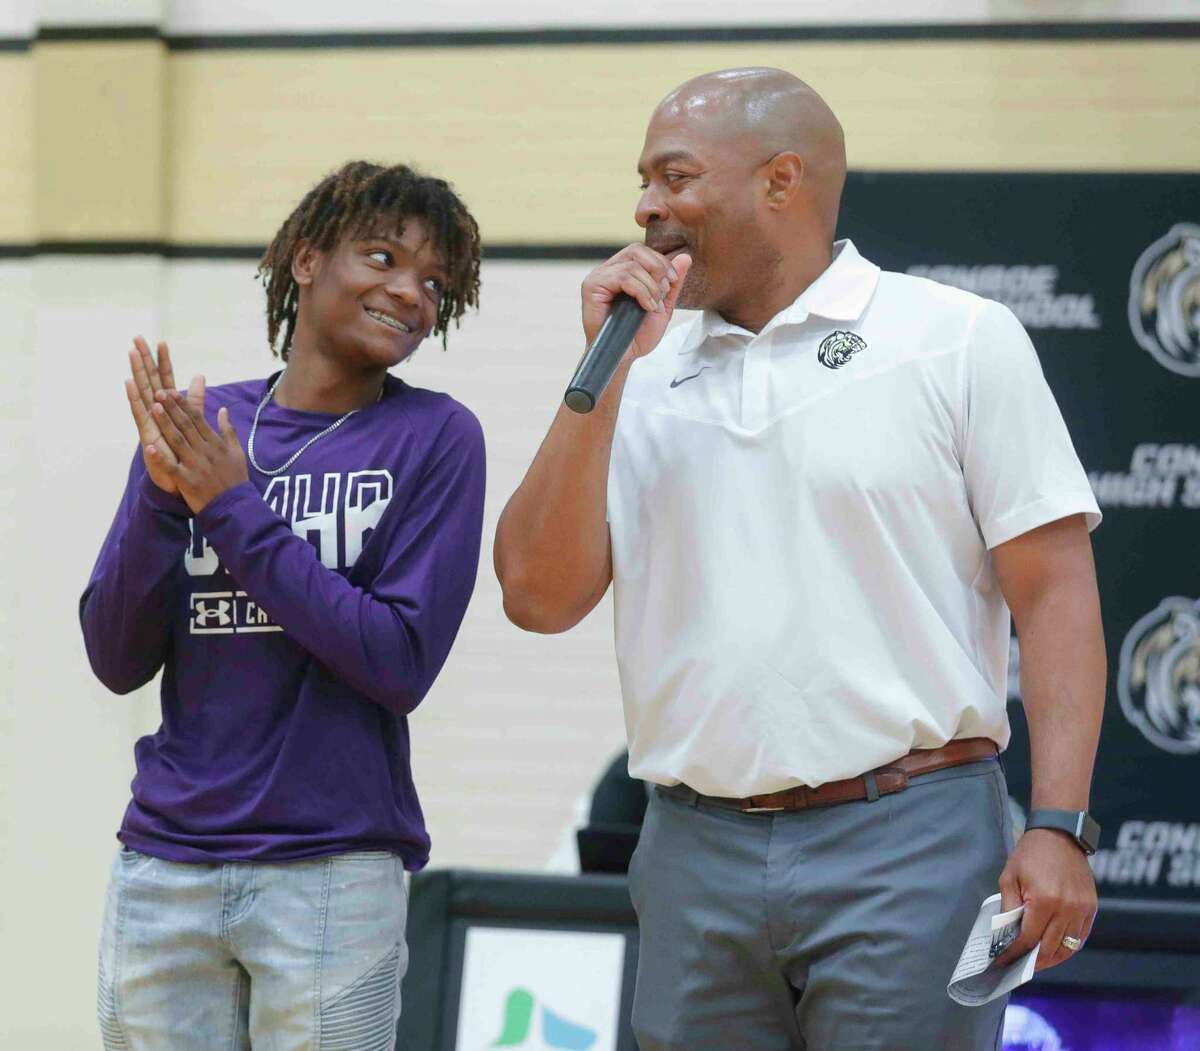 Bradin Bradford shares a moment with head football coach Cedric Hardeman before signing to play foot ball for Mary Hardin-Baylor University during an athletic signing ceremony at Conroe High School, Thursday, April 14, 2022, in Conroe.